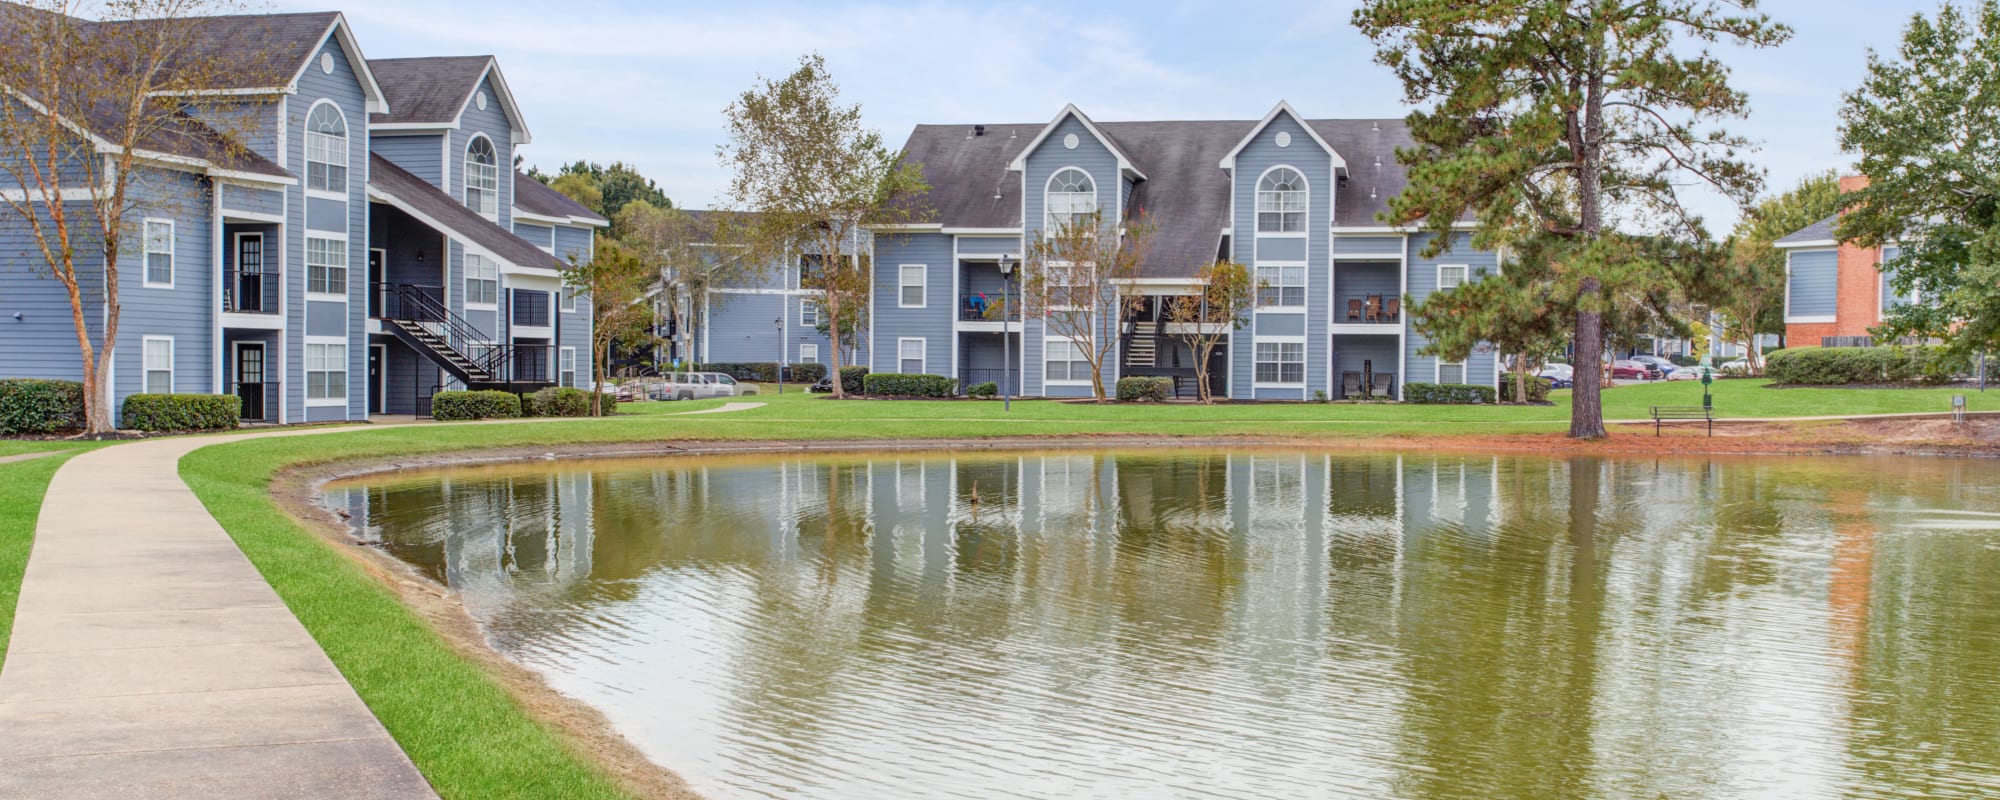 Apartments at Spring Lake in Byram, Mississippi